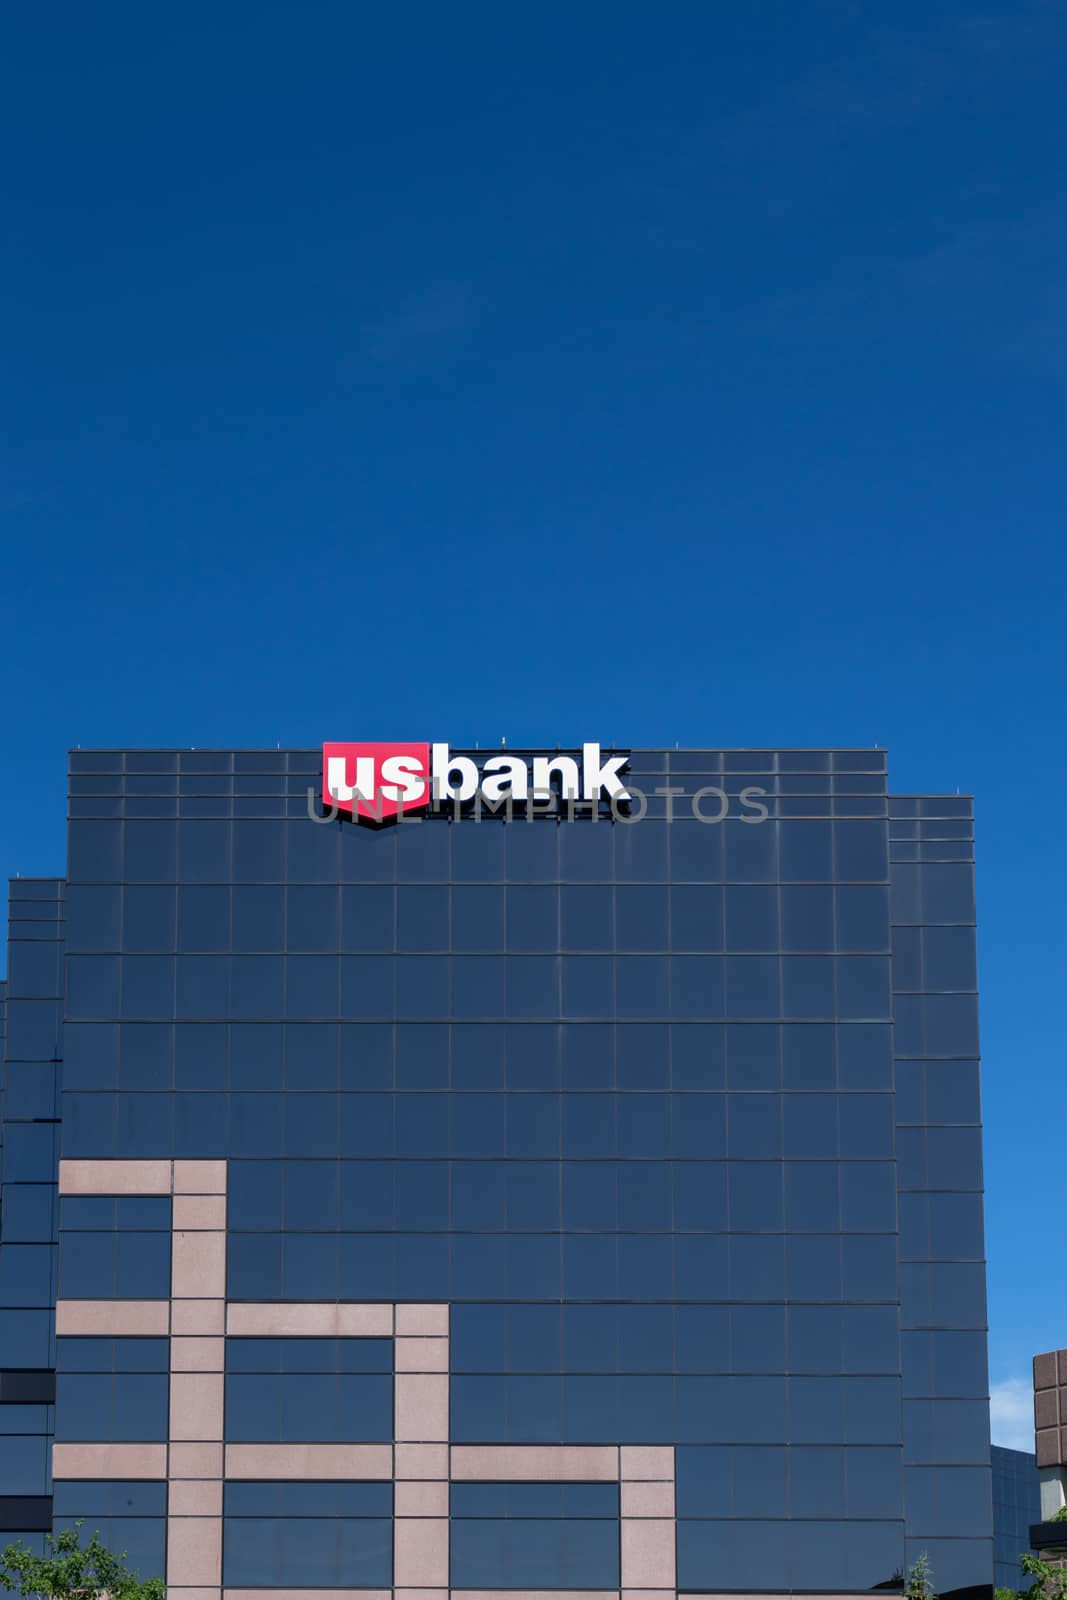 U.S. Bancorp Building by wolterk